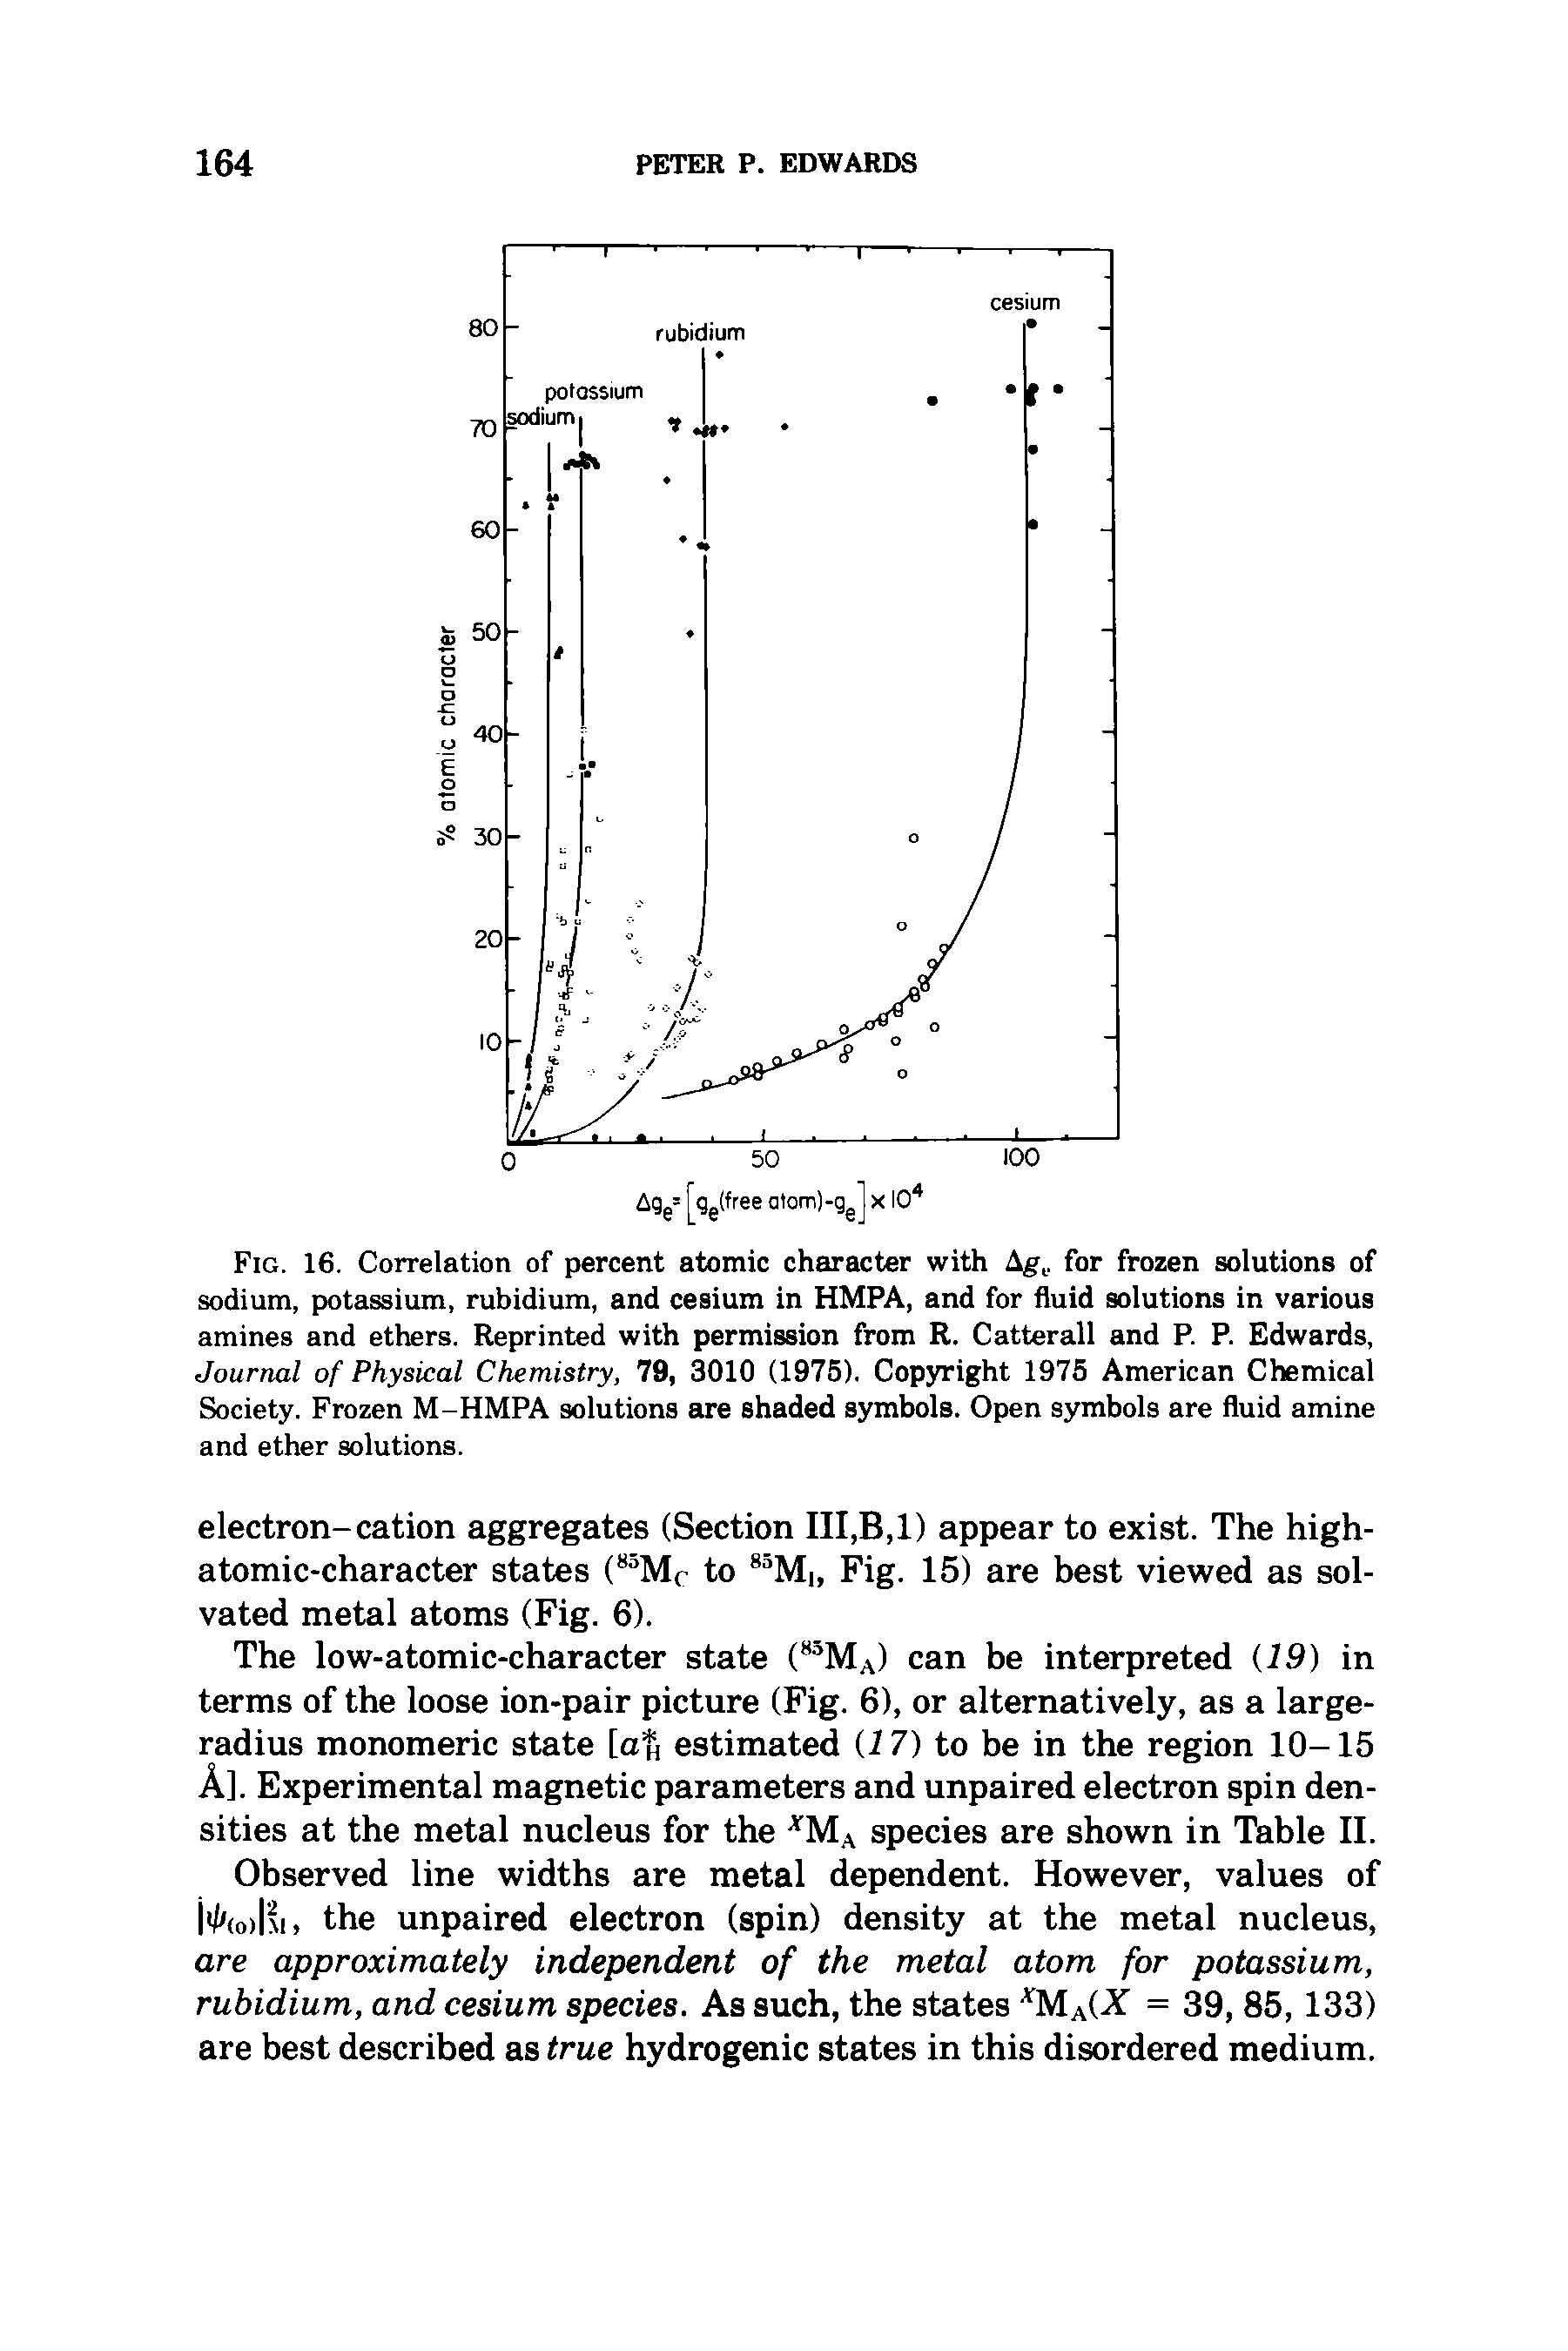 Fig. 16. Correlation of percent atomic character with Agt. for frozen solutions of sodium, potassium, rubidium, and cesium in HMPA, and for fluid solutions in various amines and ethers. Reprinted with permission from R. Catterall and P. P. Edwards, Journal of Physical Chemistry, 79, 3010 (1975). Copyright 1975 American Chemical Society. Frozen M-HMPA solutions are shaded symbols. Open symbols are fluid amine and ether solutions.